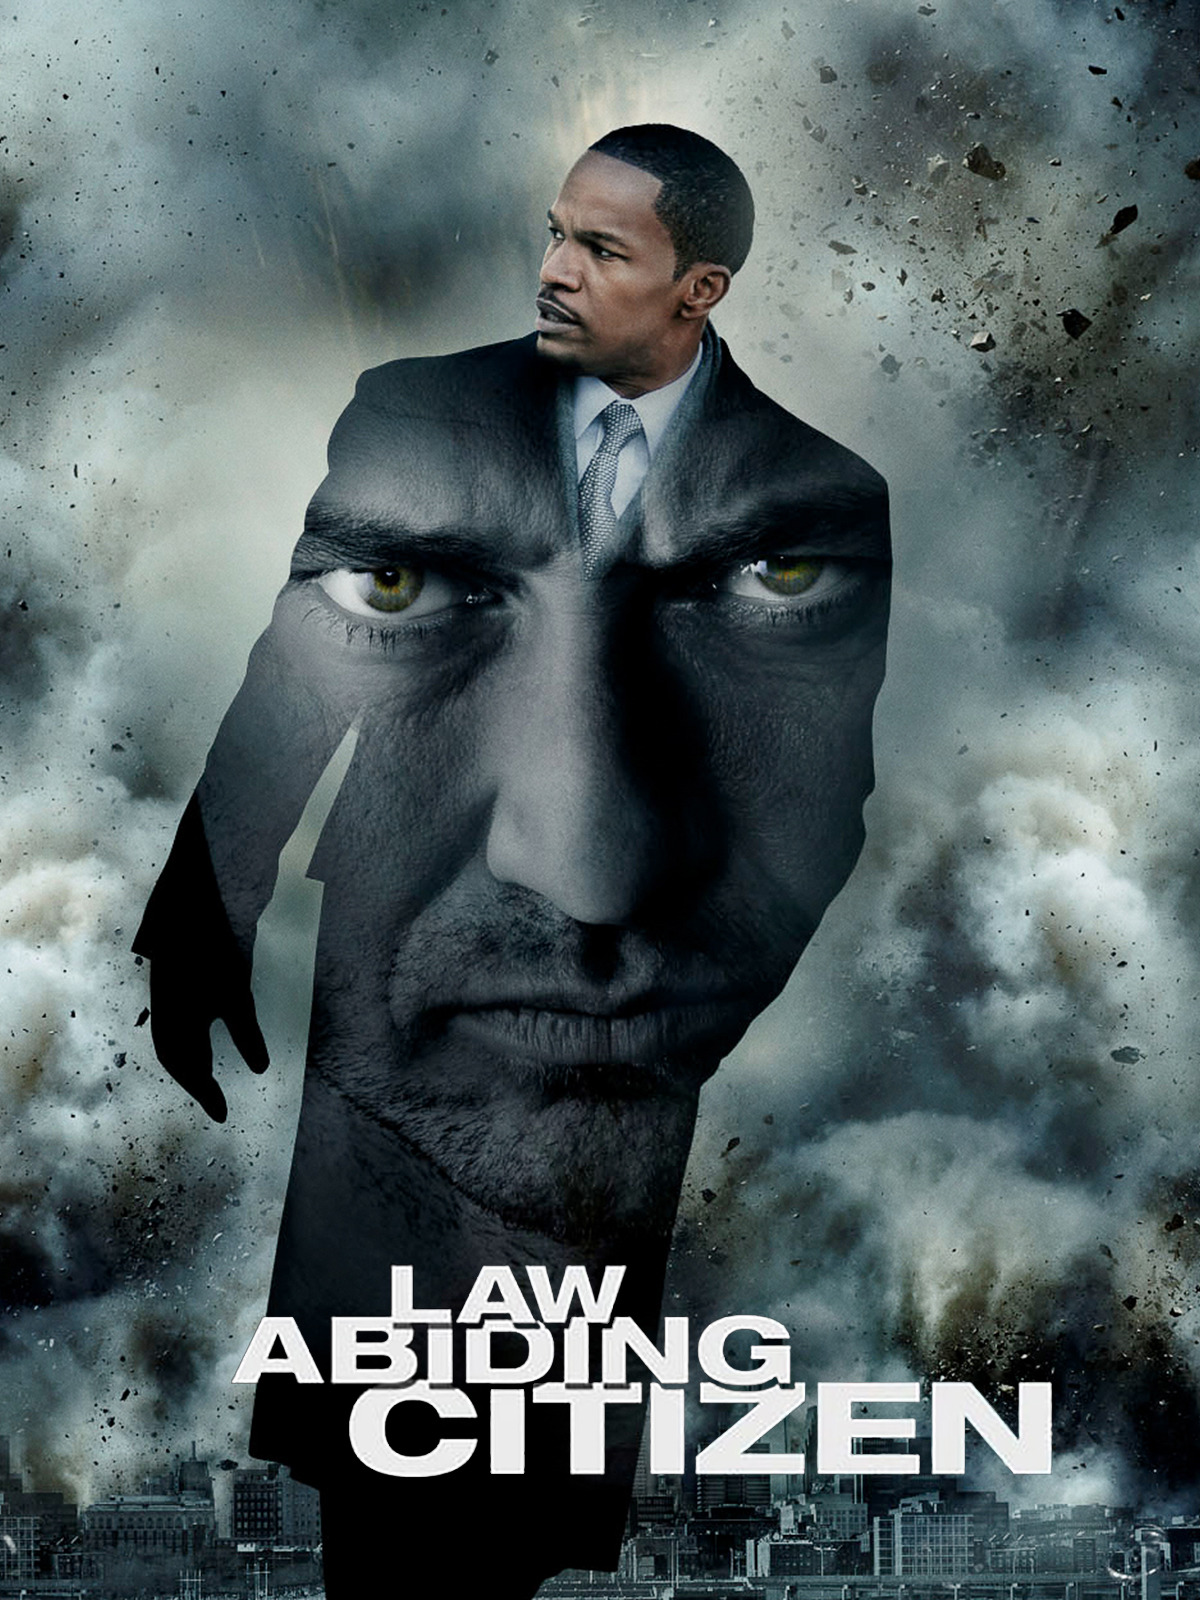 Law Abiding Citizen movie review - MikeyMo